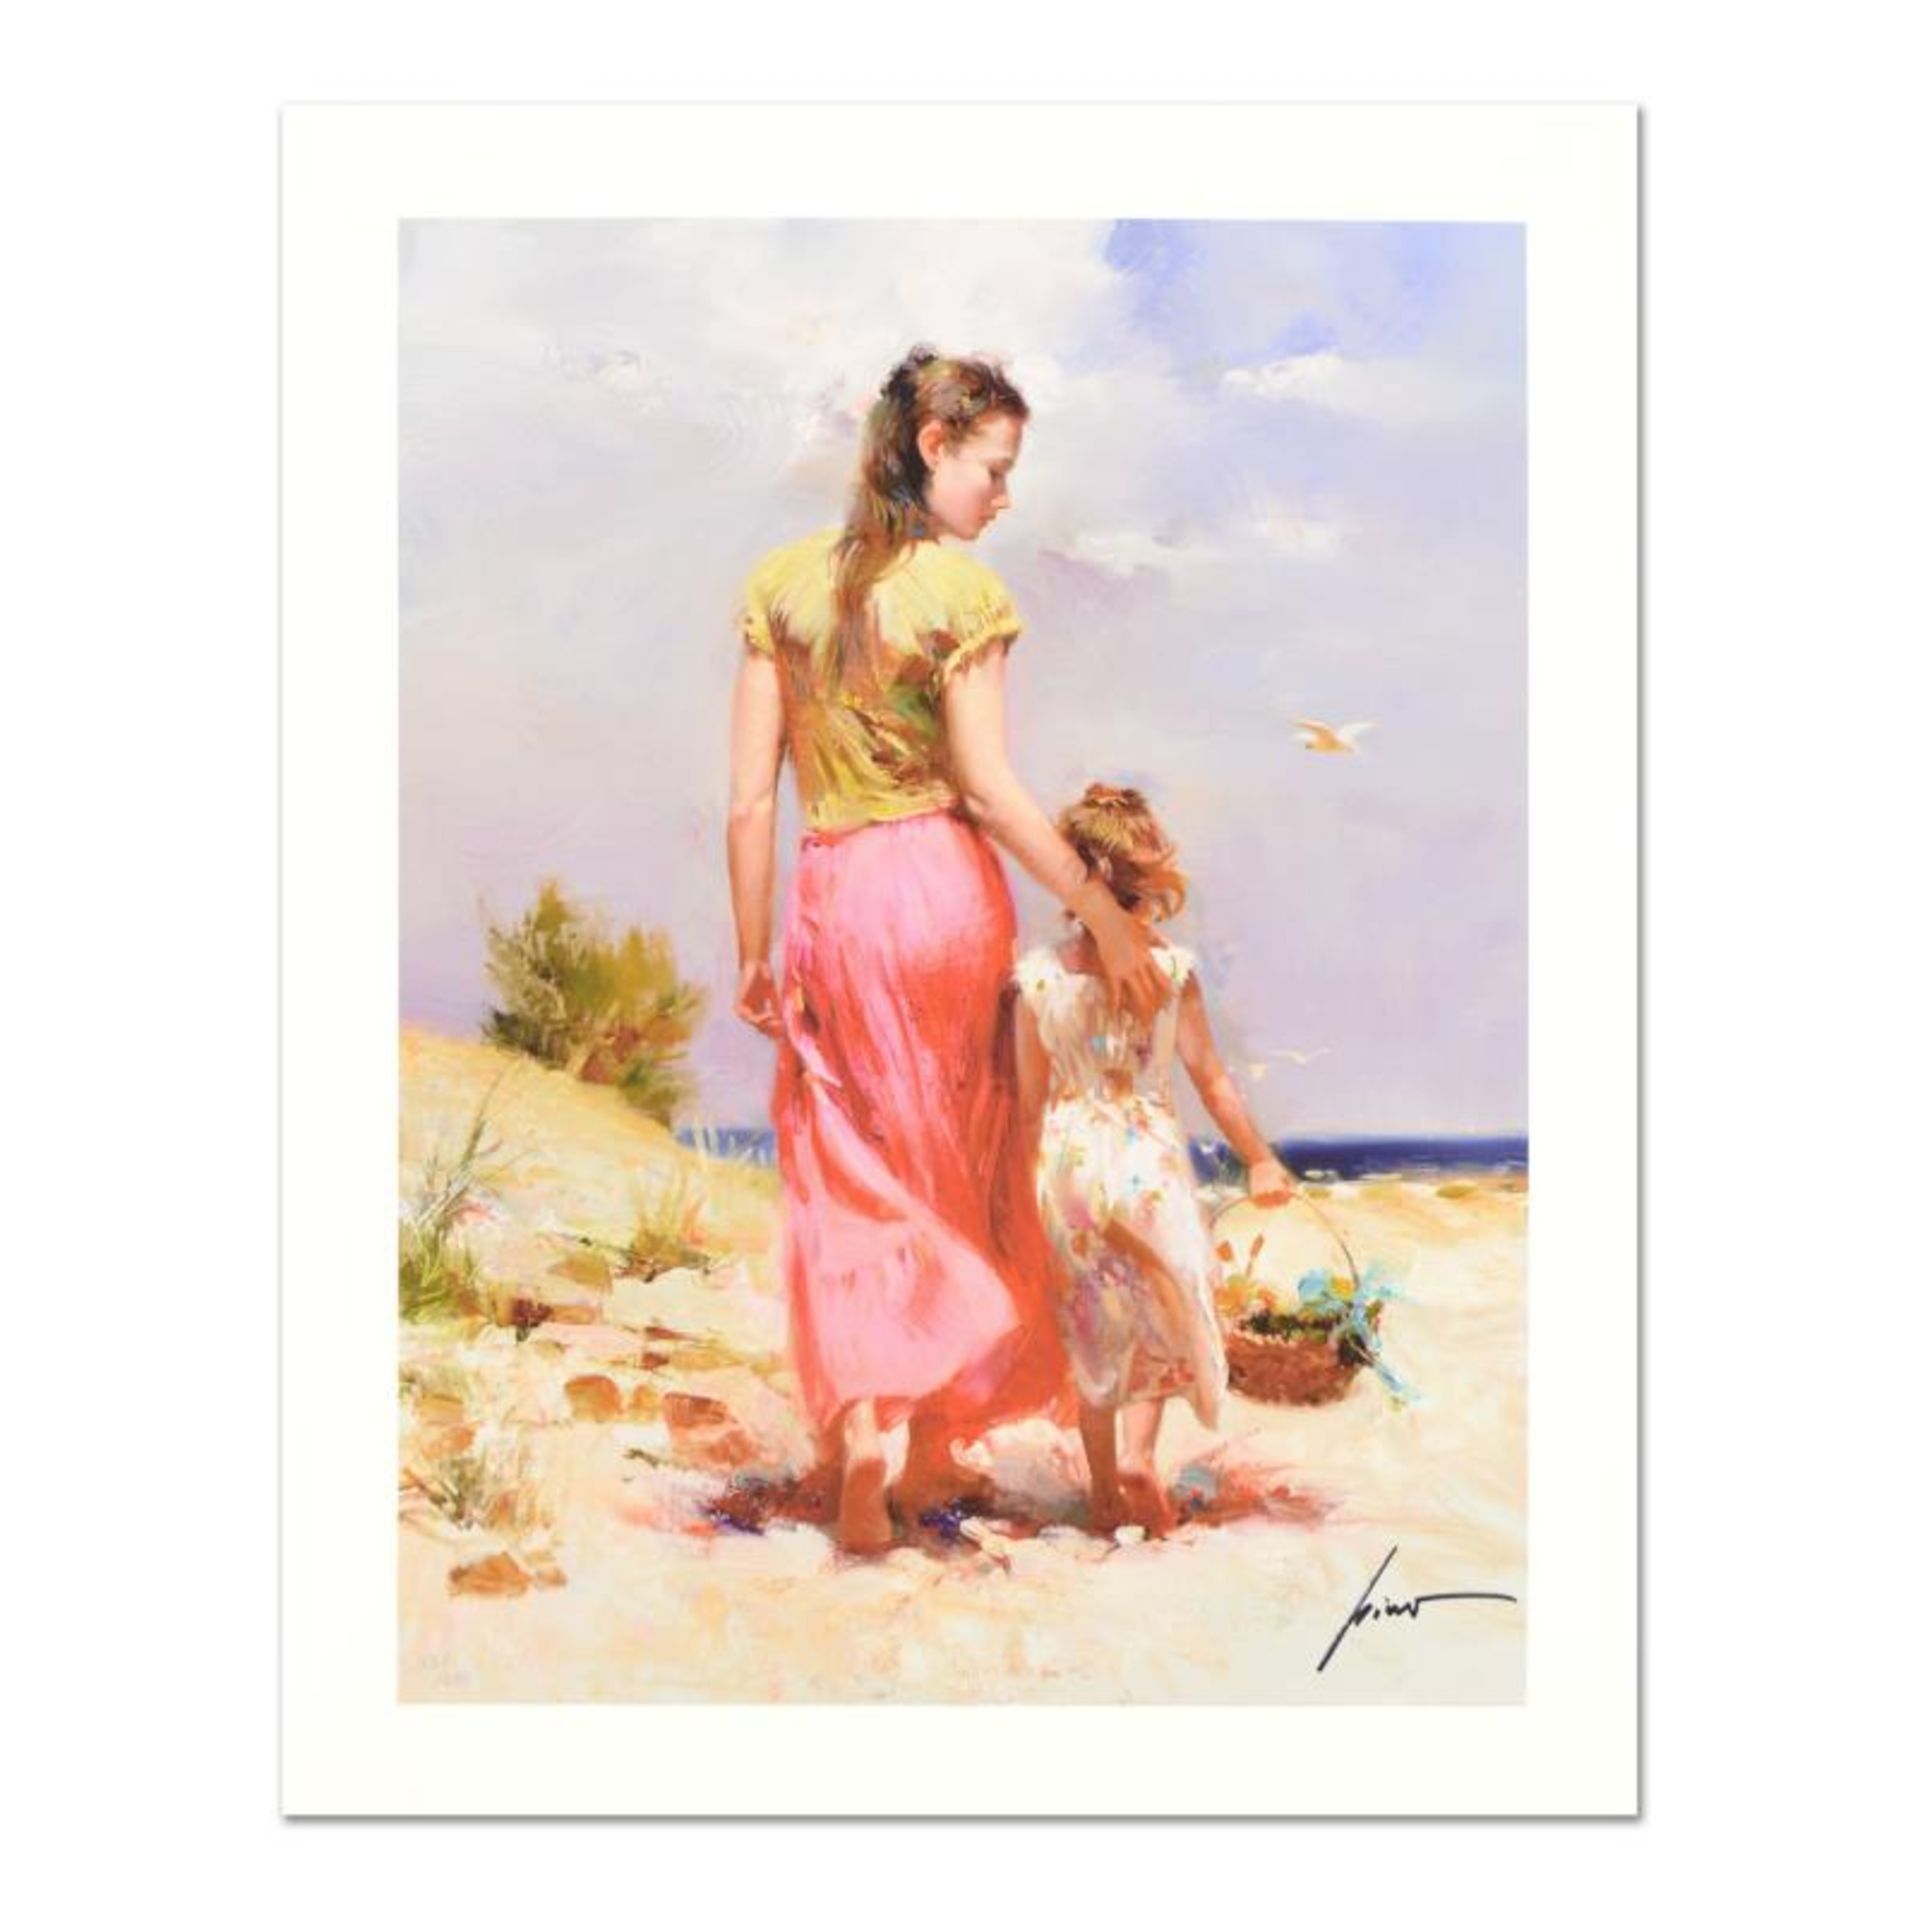 Pino (1939-2010) "Seaside Walk" Limited Edition Giclee. Numbered and Hand Signed